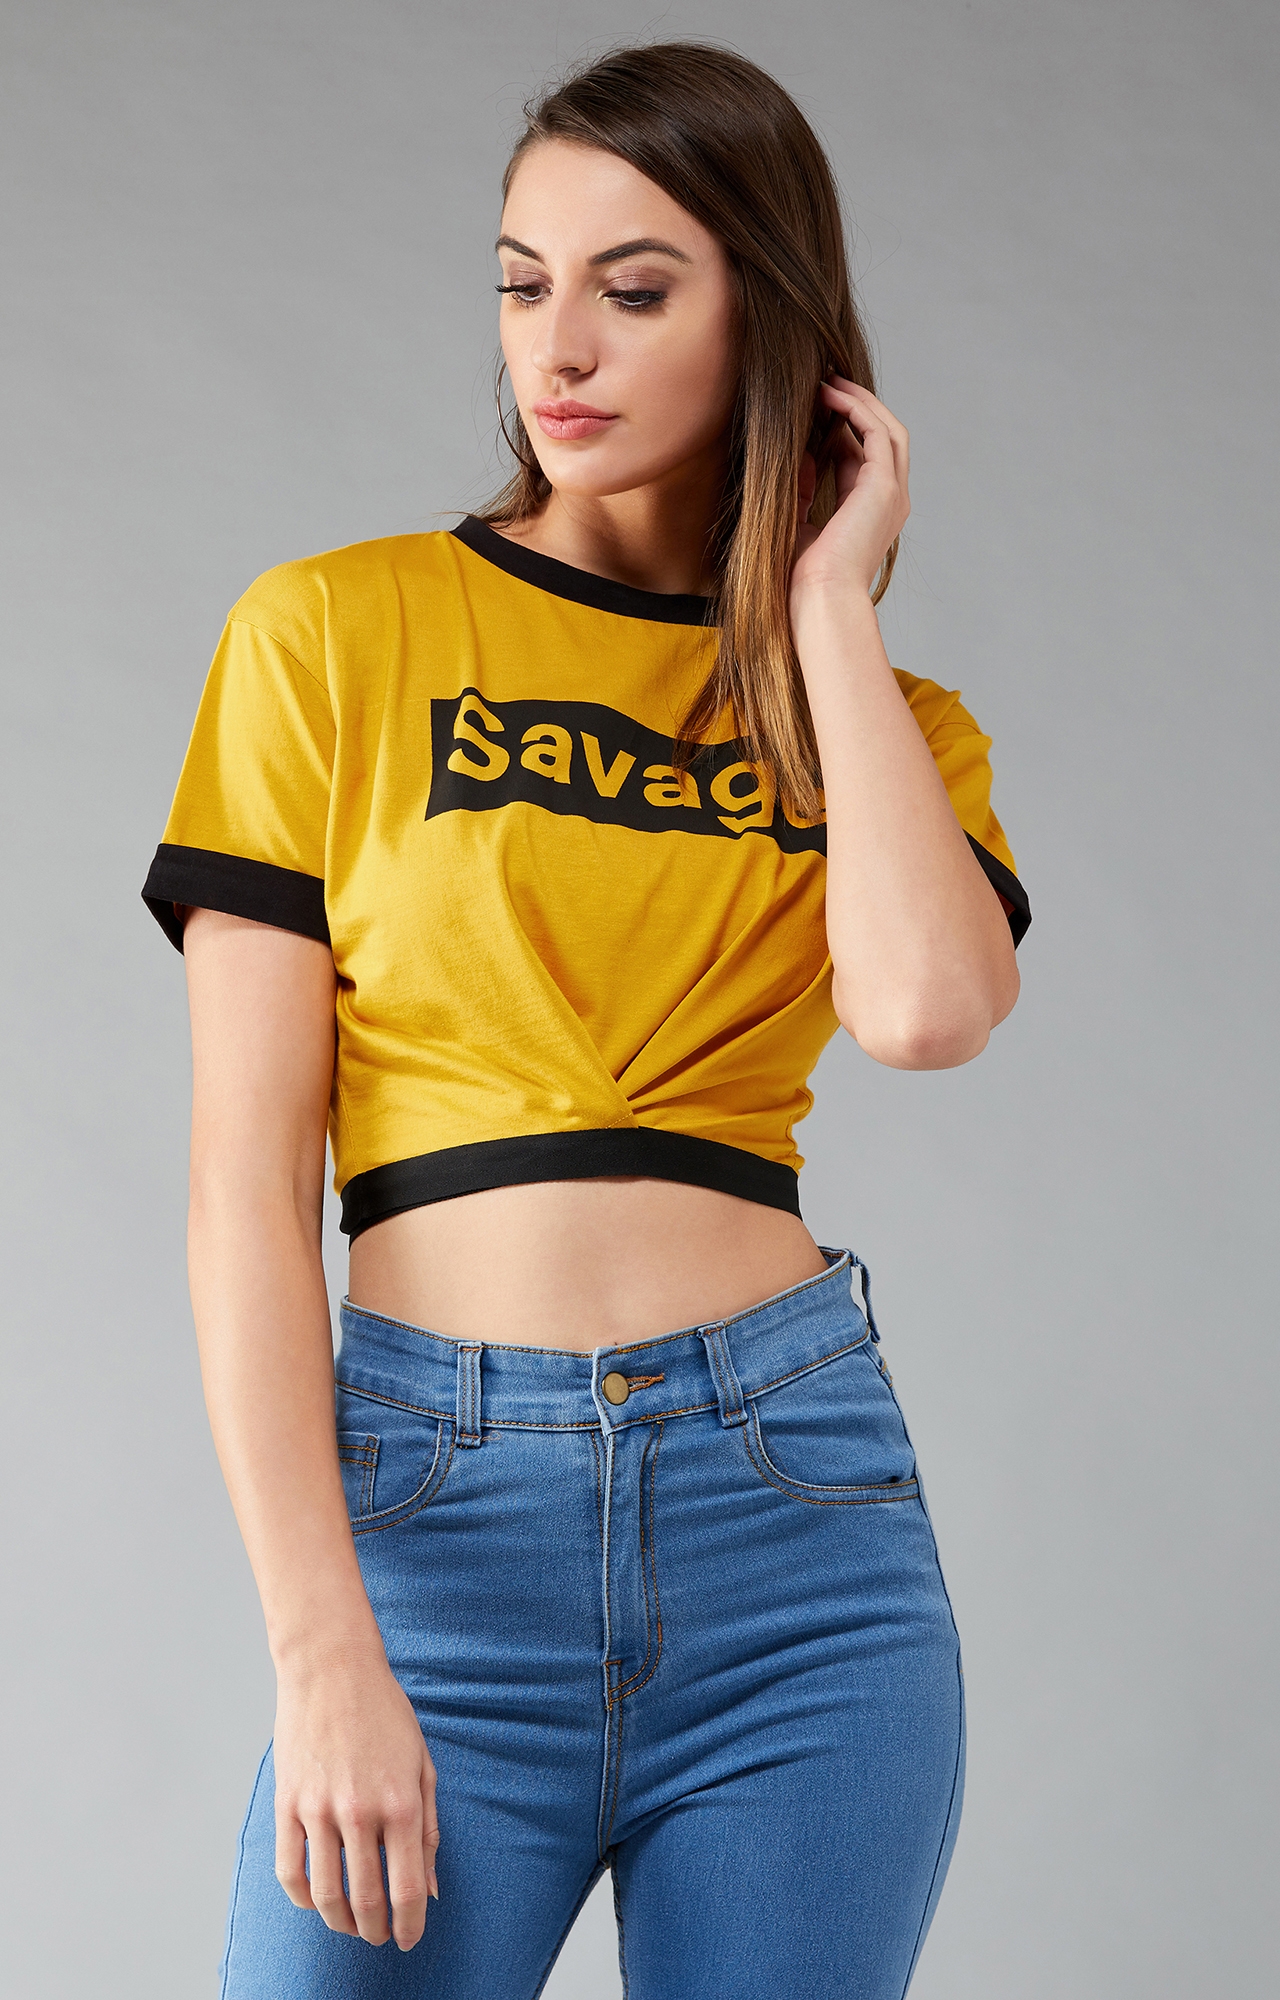 Women's Mustard and Black Round Neck Short Sleeve Printed Cropped T-Shirt